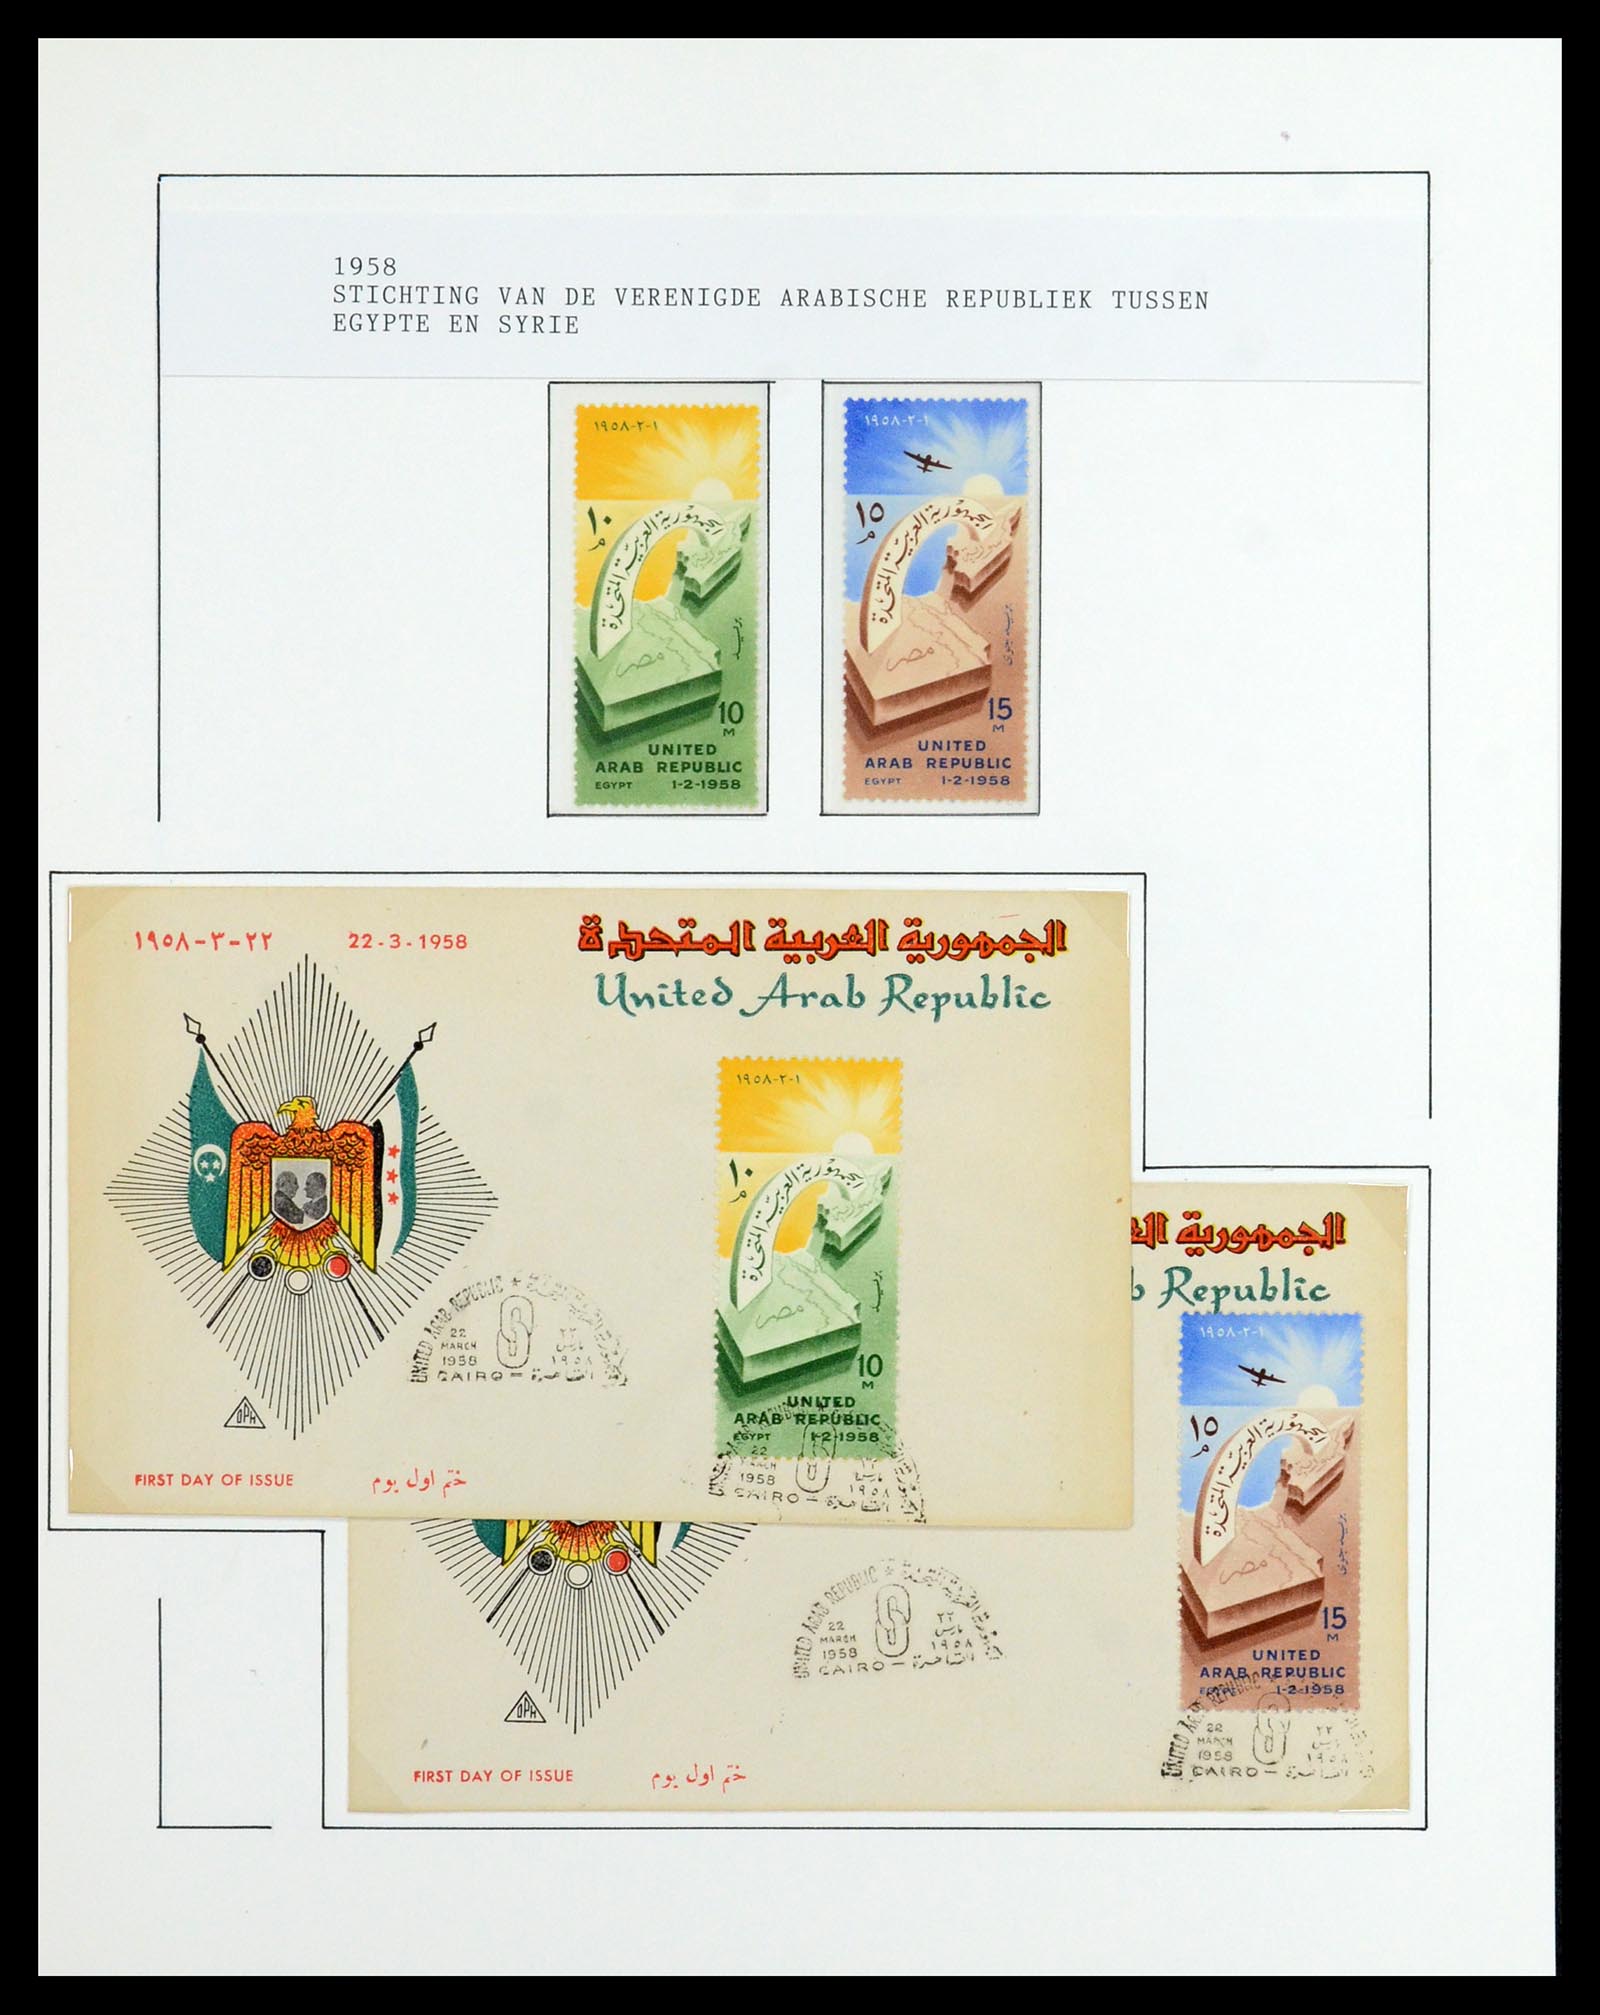 36492 075 - Stamp collection 36492 Palestine 1948-1967.